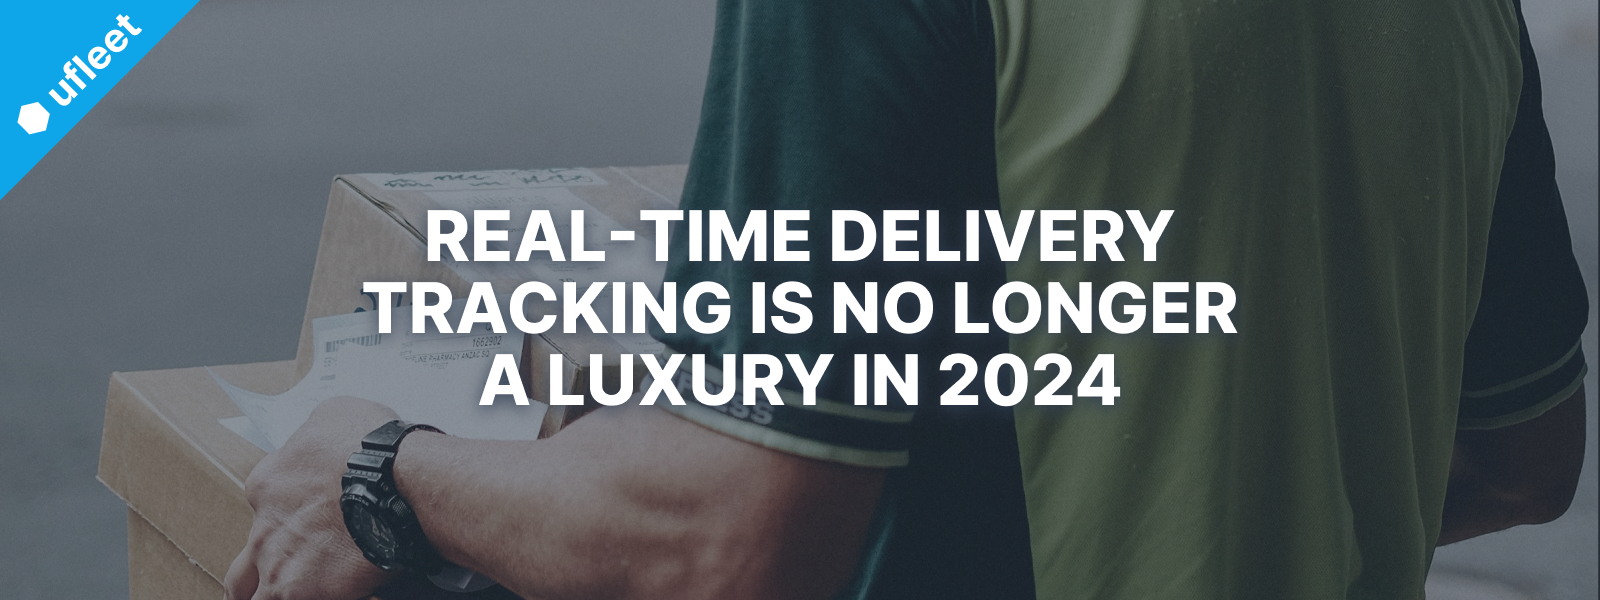 real-time delivery tracking is a must